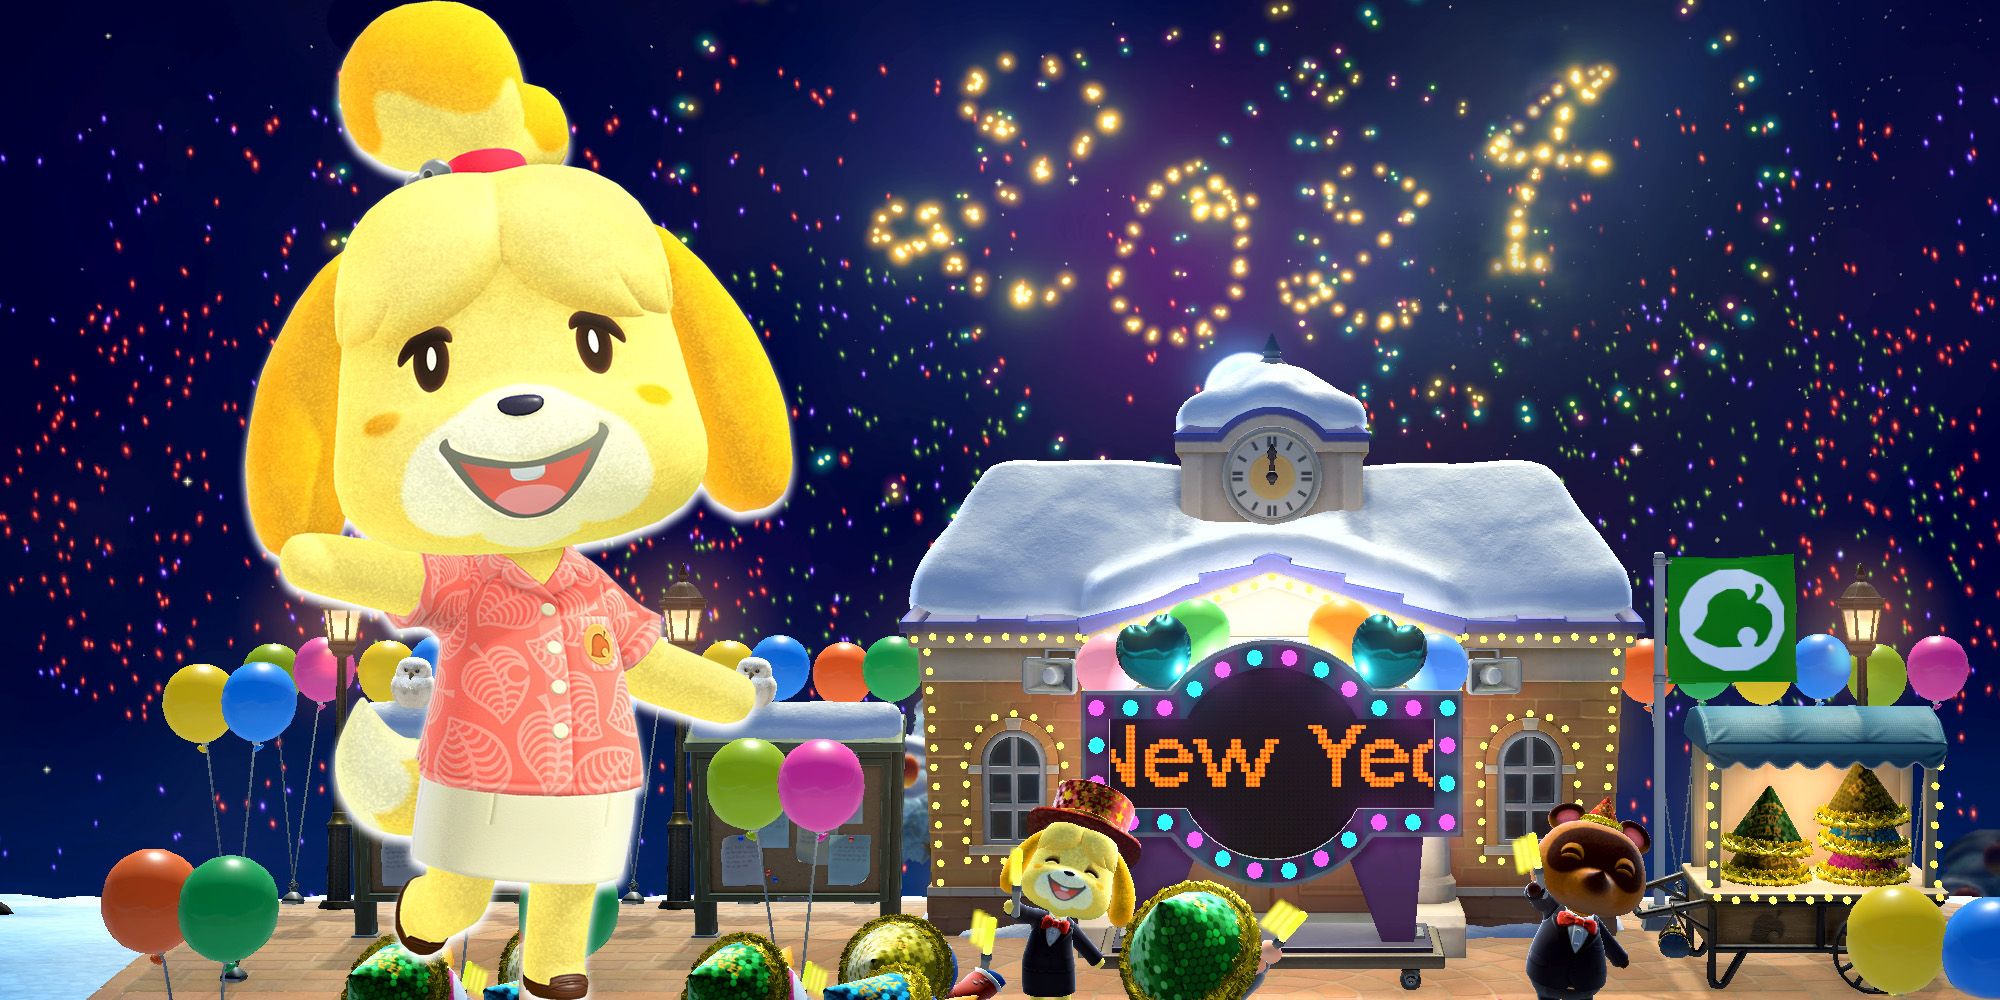 Isabelle from Animal Crossing New Horizons on a night sky background from the game. Fireworks reading 